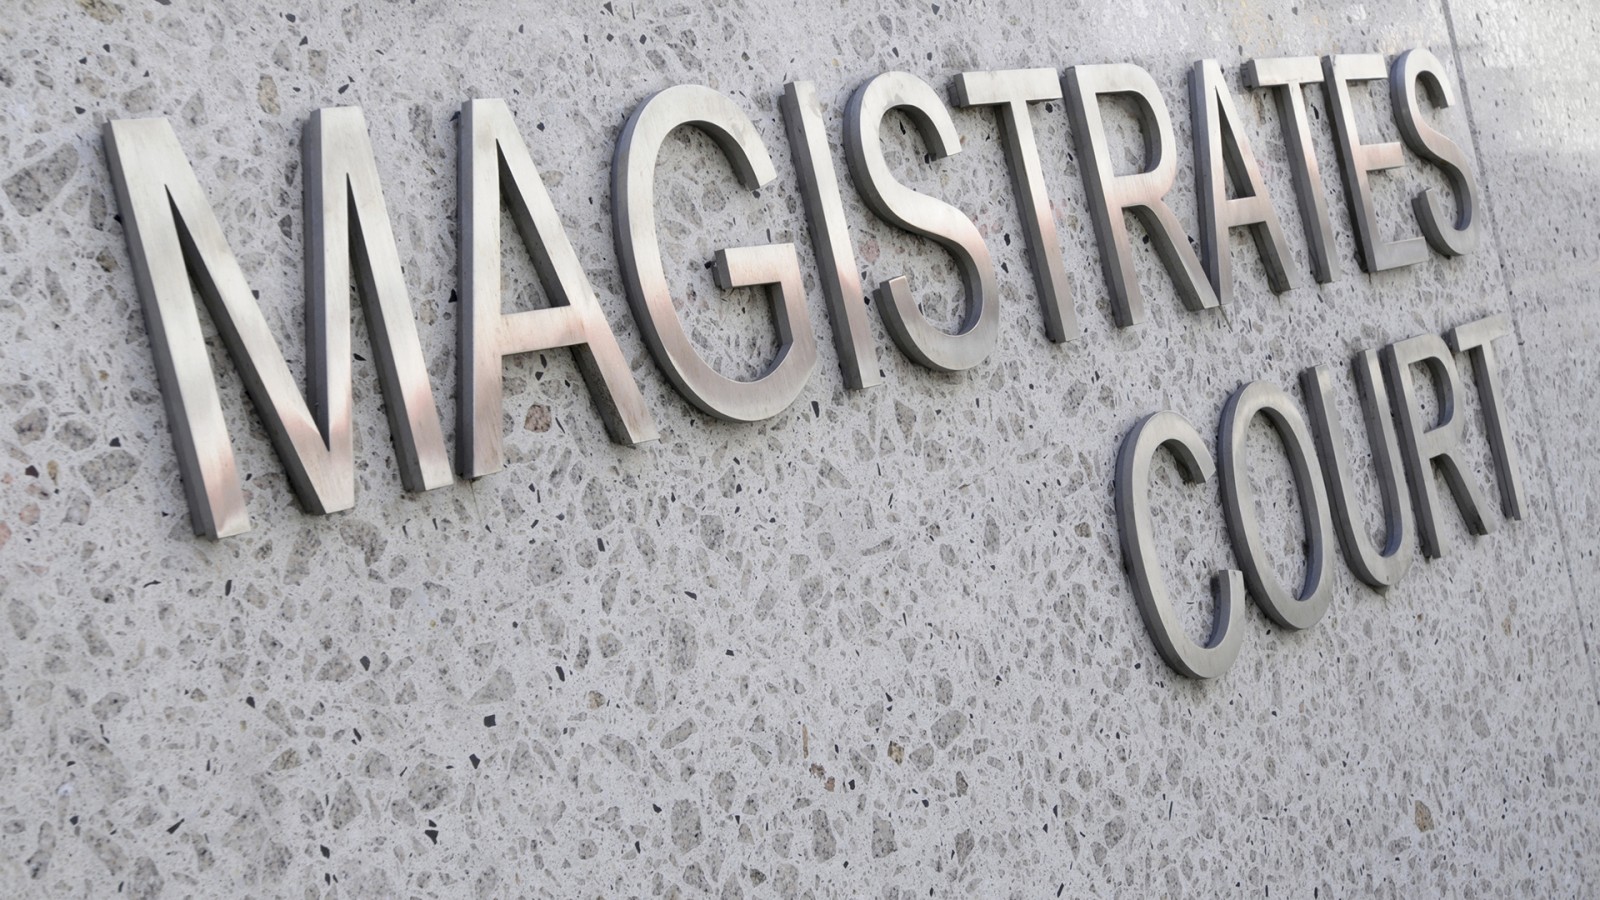 Magistrates Court sign in stainless steel